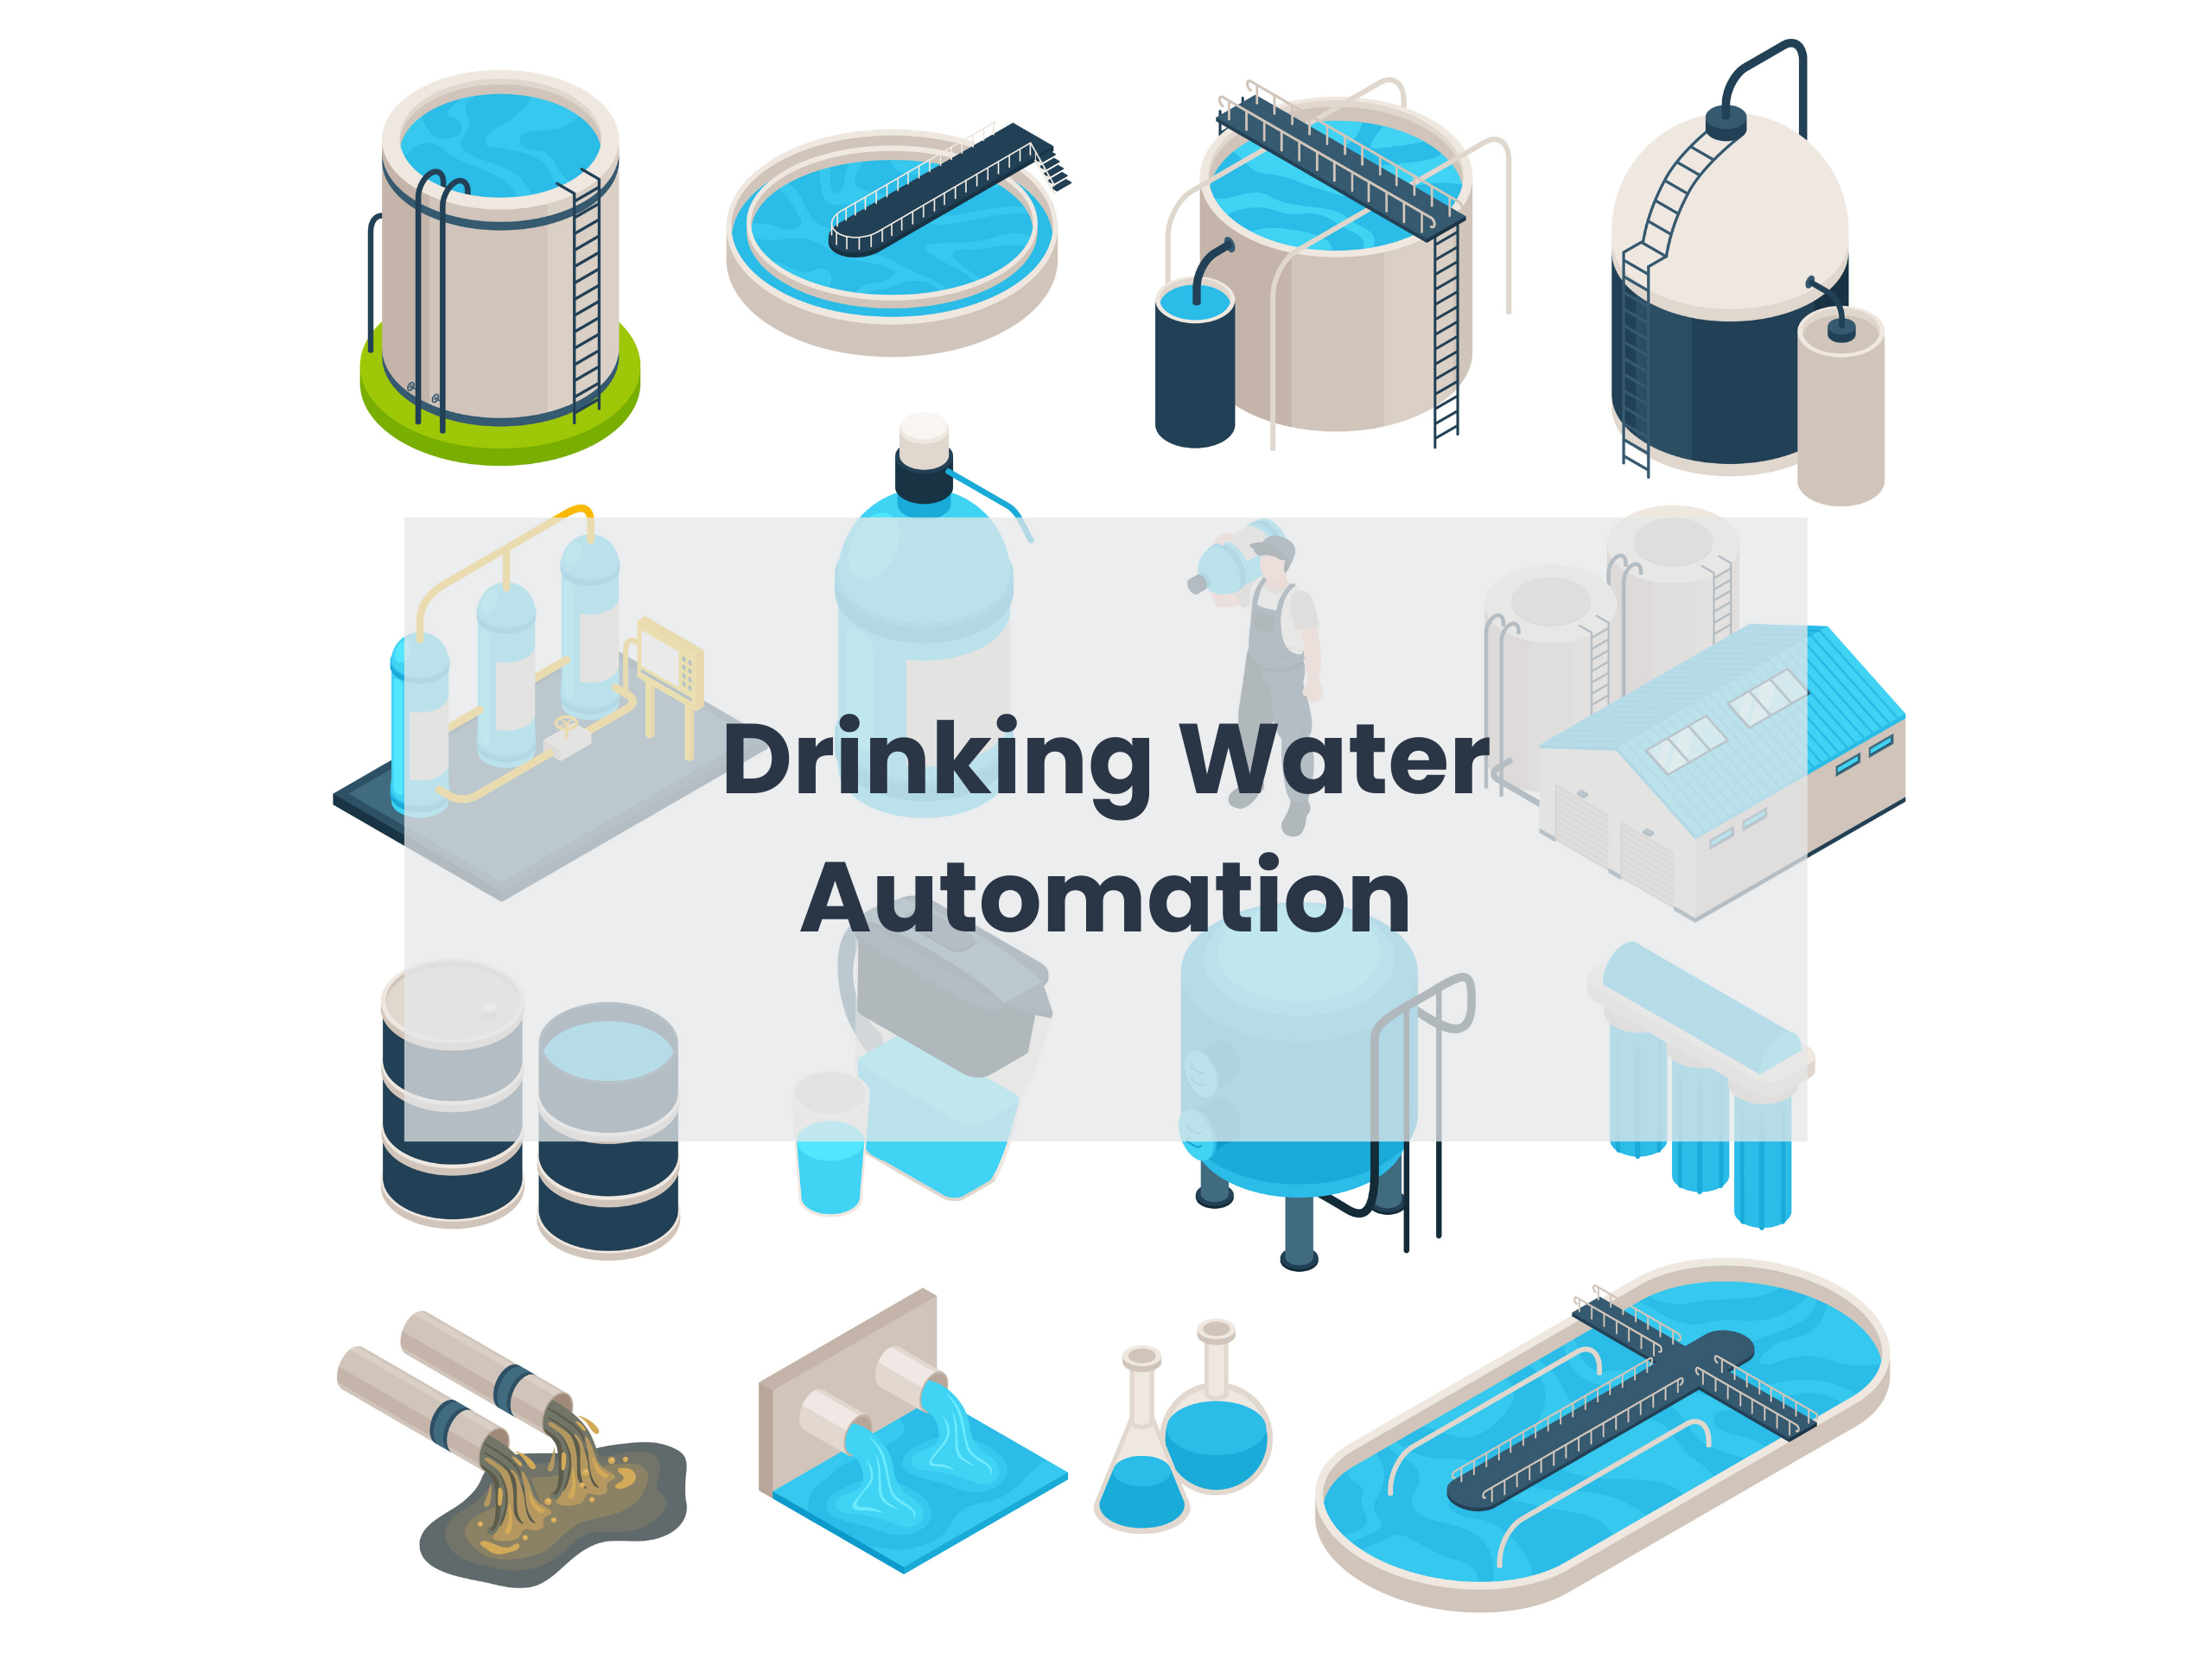 Drinking Water Automation